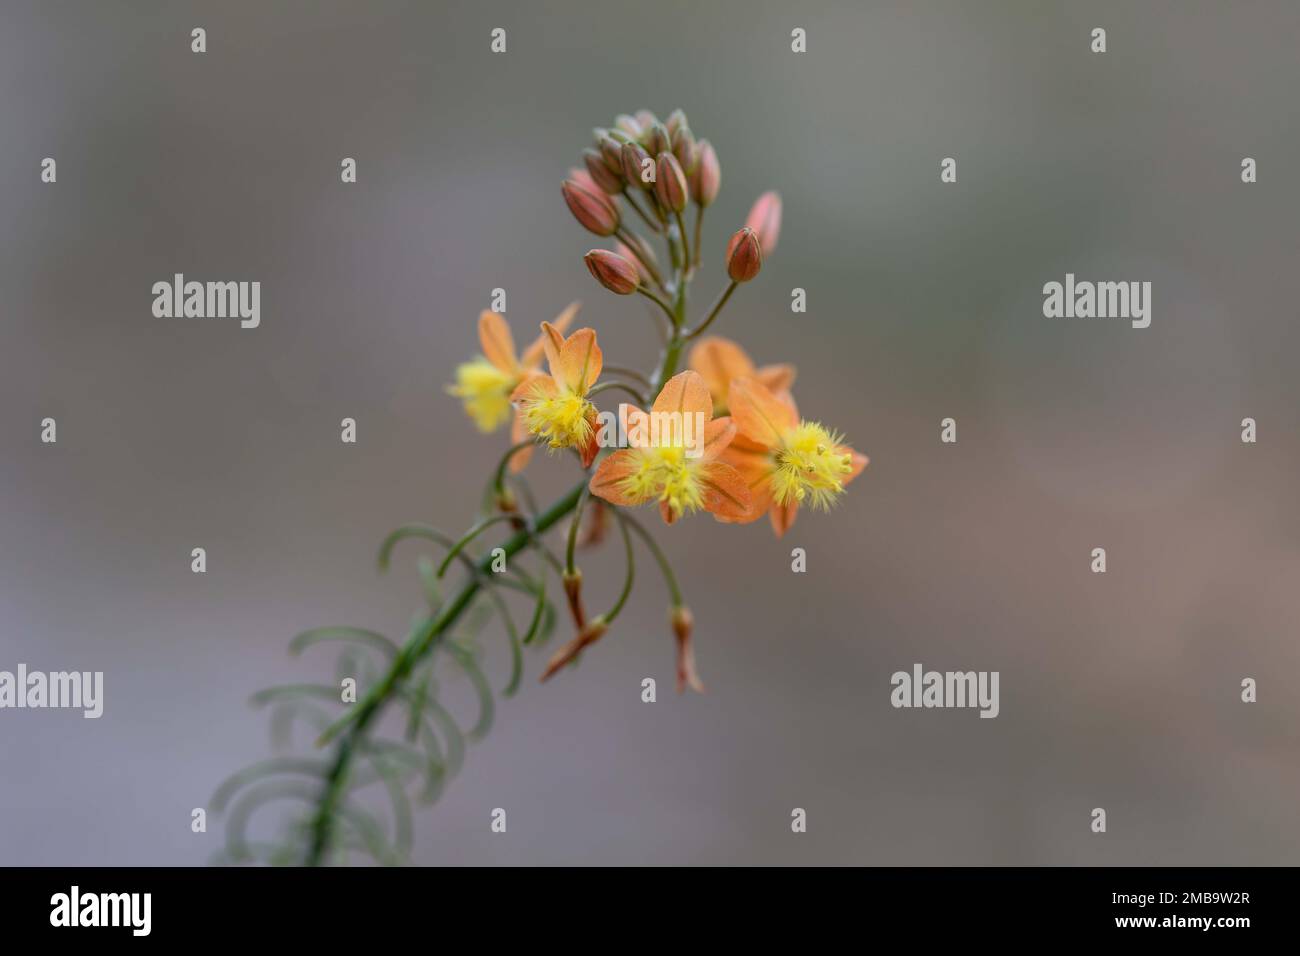 Yellow blossoms of Bulbine frutescens in the blurred background Stock Photo